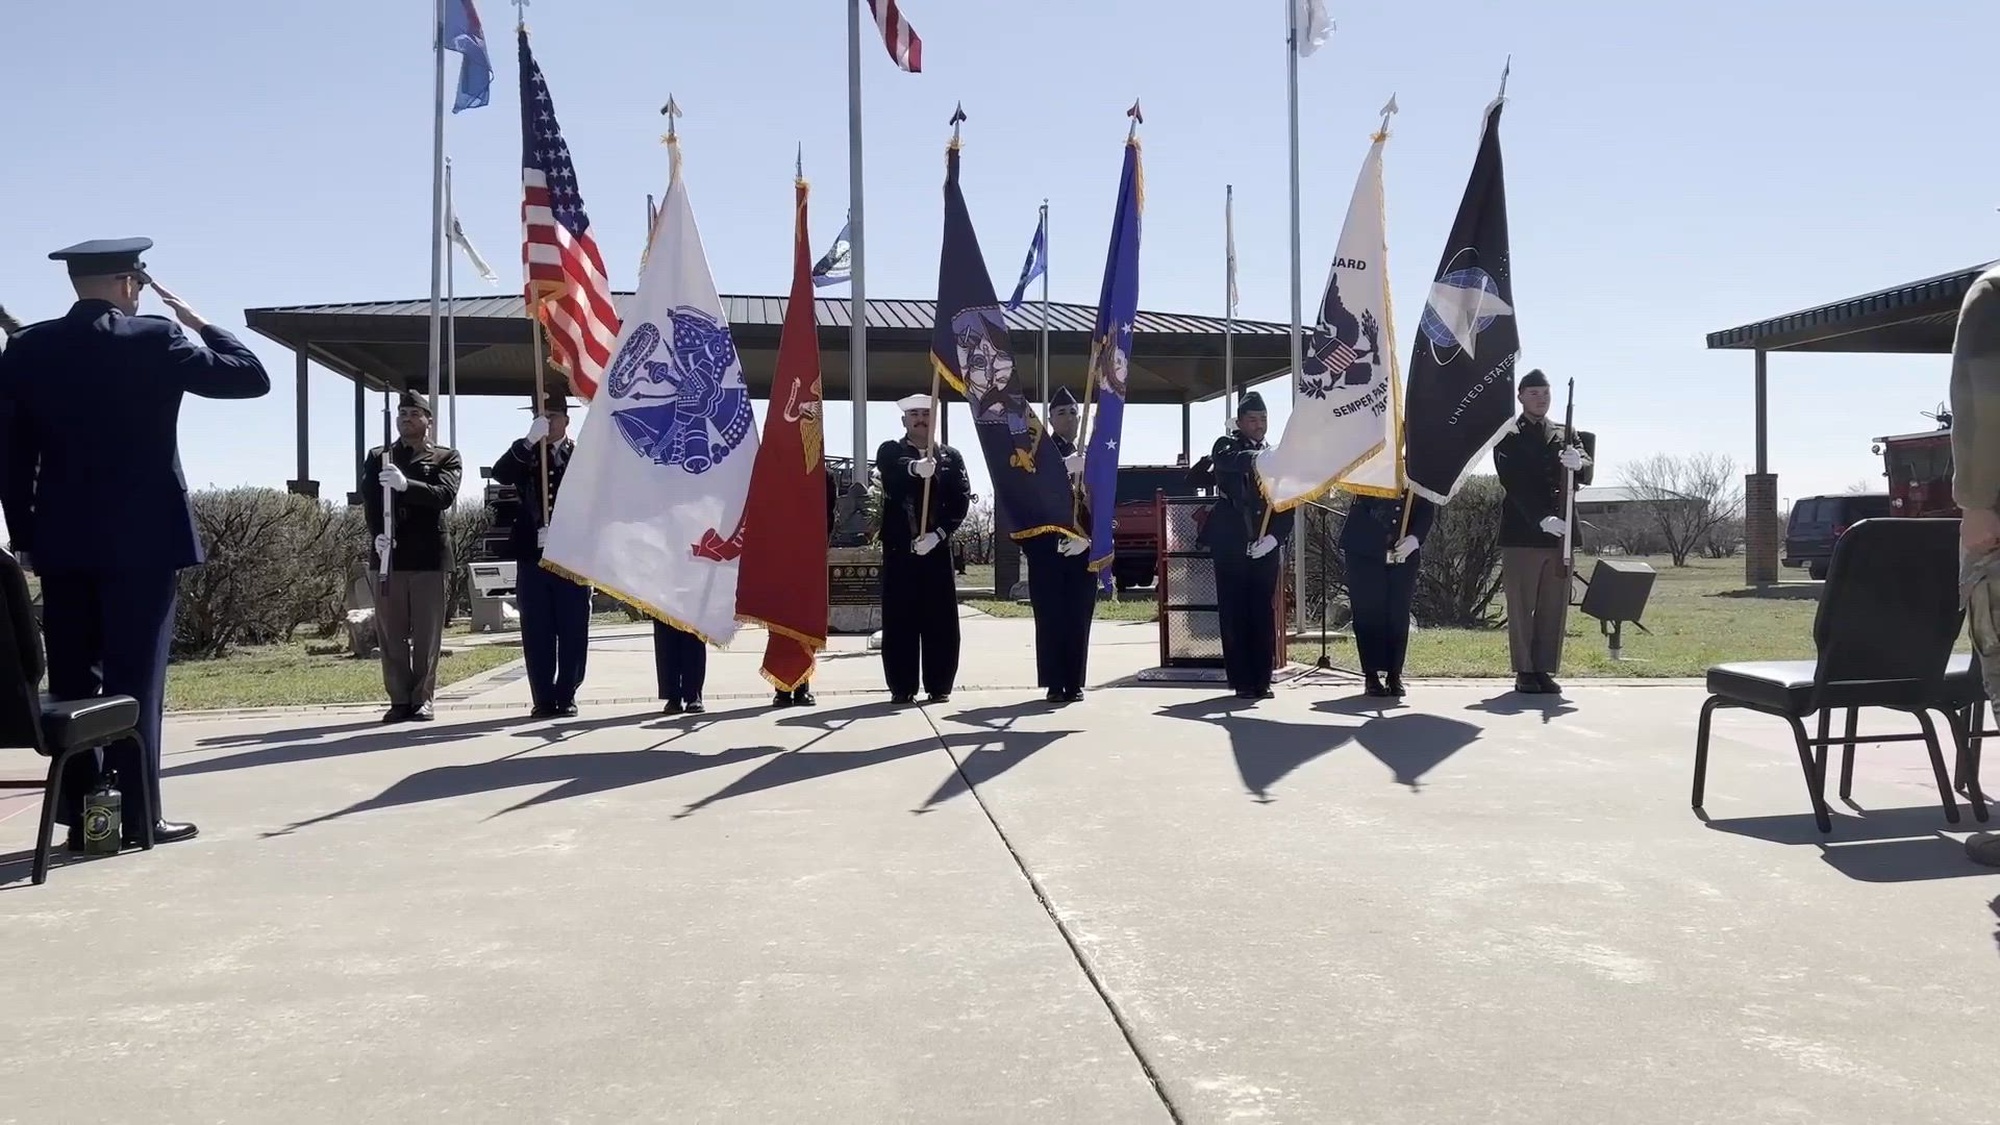 Goodfellow Air Force Base honors the men and women who paid the ultimate price for the freedoms we enjoy on this Memorial Day.